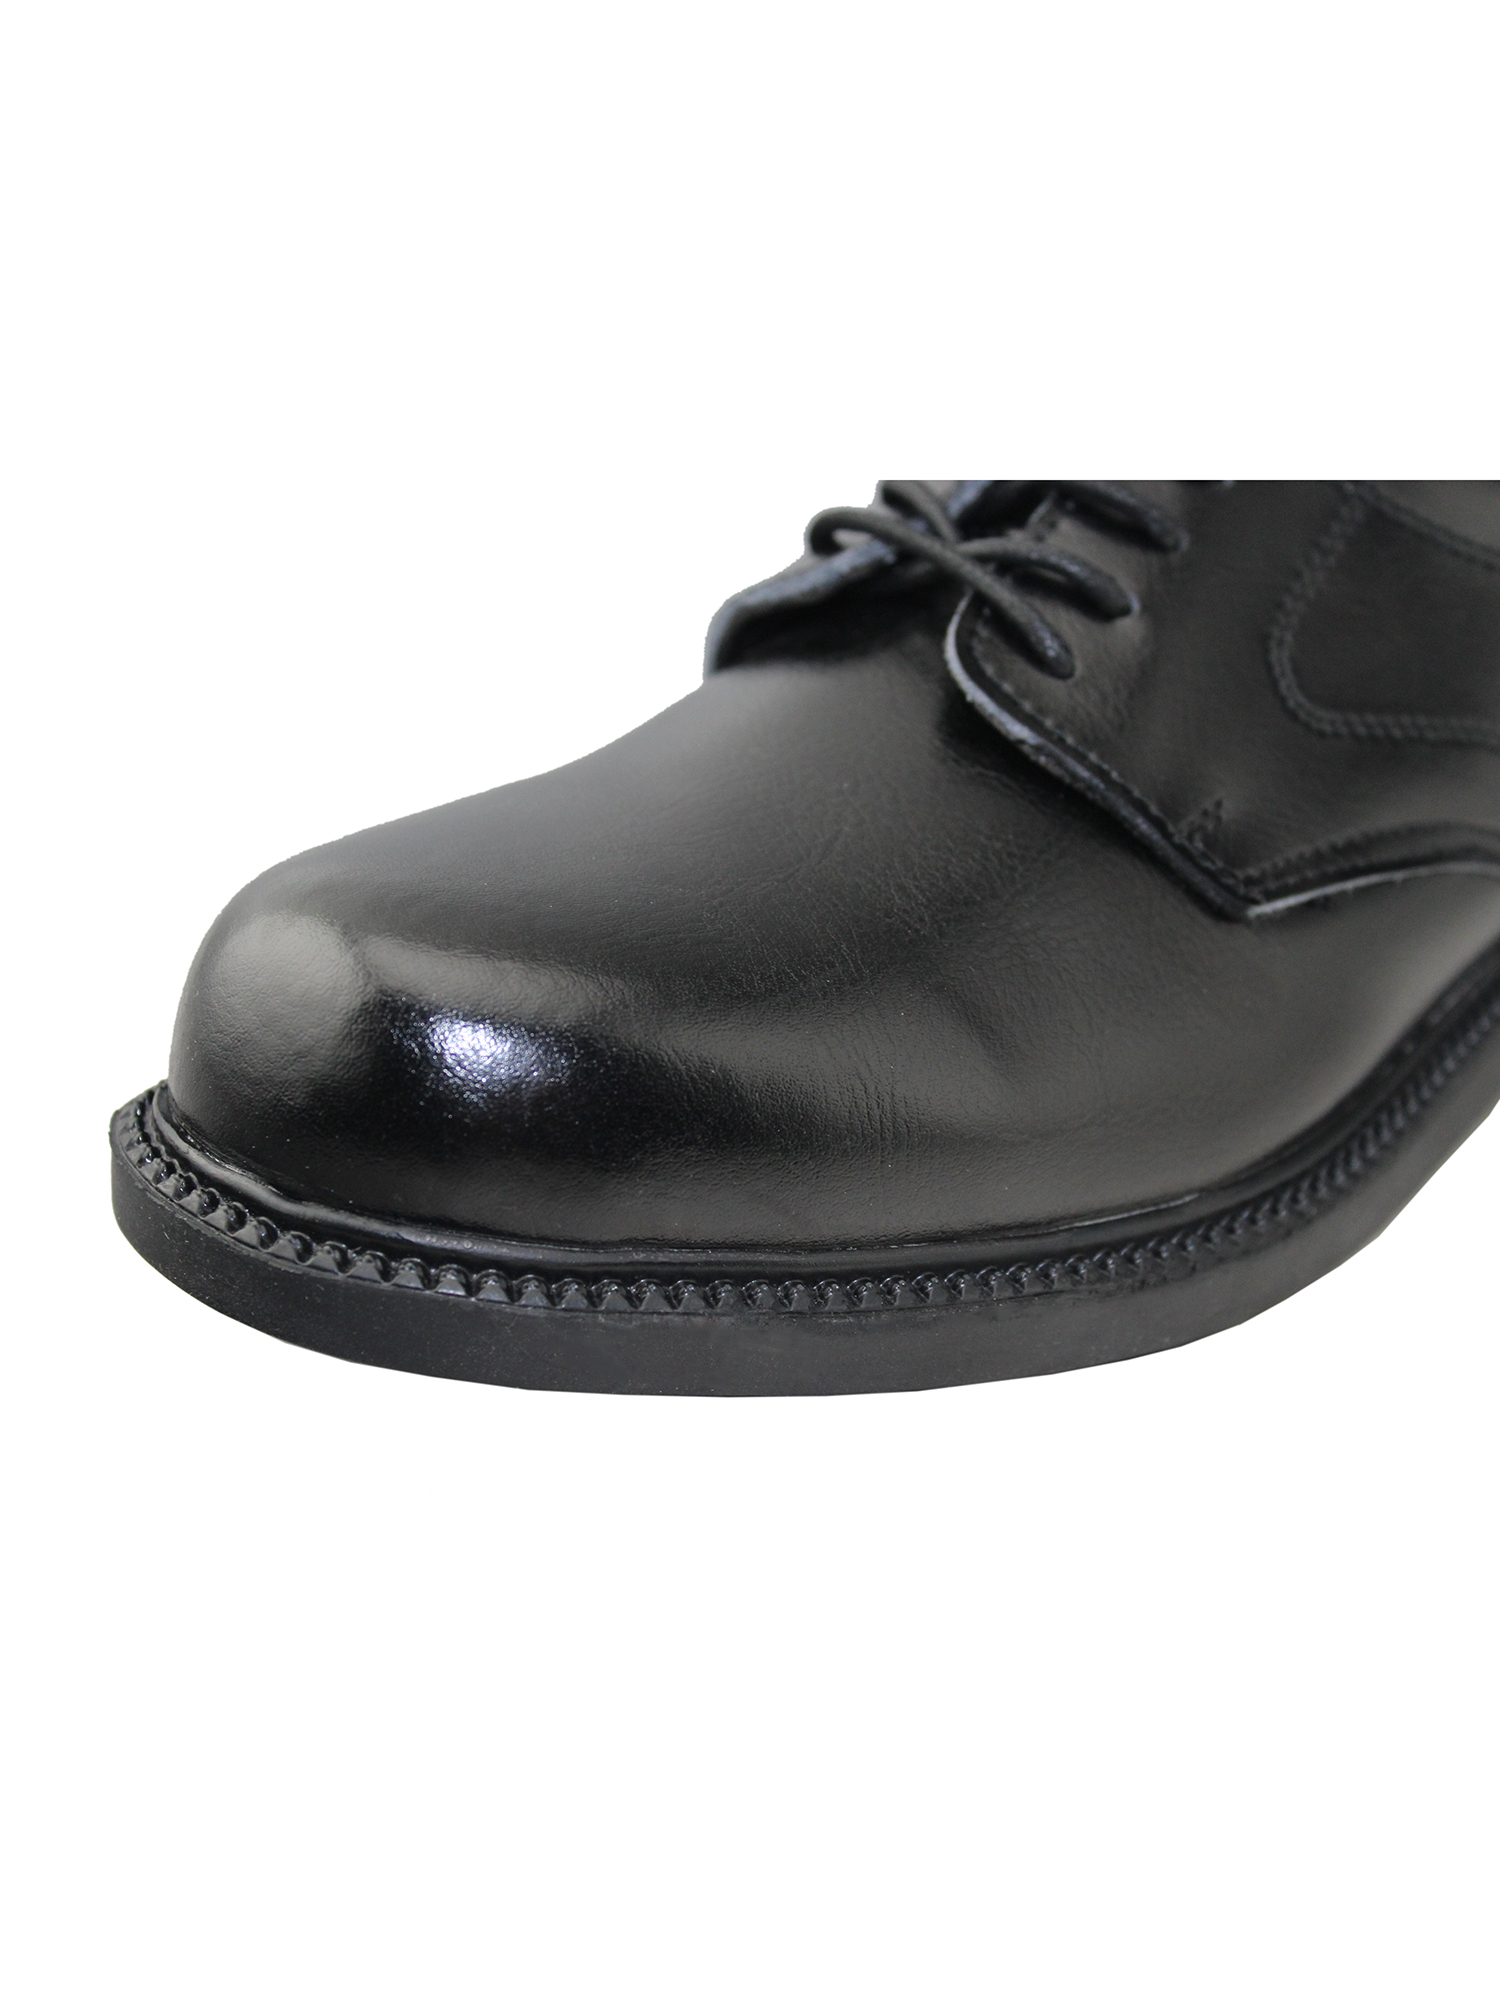 Mens Oxford Leather Shoes Comfortable Black Lace Up Slip and Oil Resistant Shoes - image 4 of 5